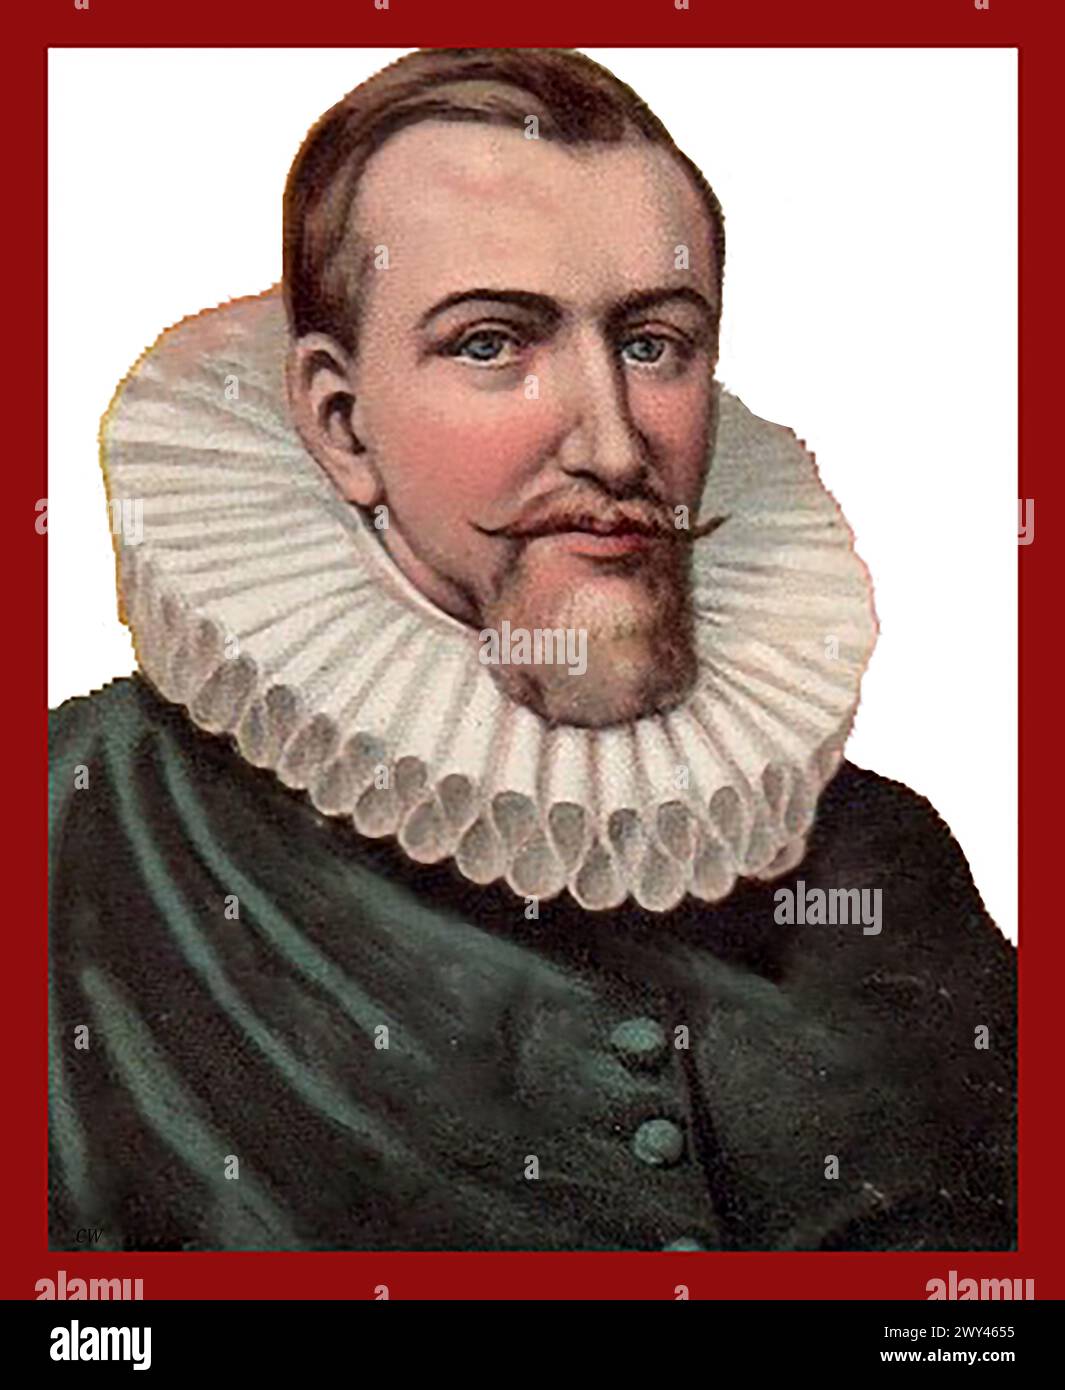 A colour Portrait of early English explorer (William?) Henry Hudson (C1565 – C1611) wearing a ruff .  He was an English   sea explorer and navigator during the early 17th century and is  best known for his explorations of present-day Canada and   north- eastern United States and his search for a rumoured Northeast Passage to Cathay (China) via a route above the Arctic Circle. working for the Dutch East India Company - Een kleurenportret van de vroege Engelse zeeverkenner Henry Hudson (C1565 - C1611) met een kraag, die werkte voor de Verenigde Oost-Indische Compagnie. Stock Photo